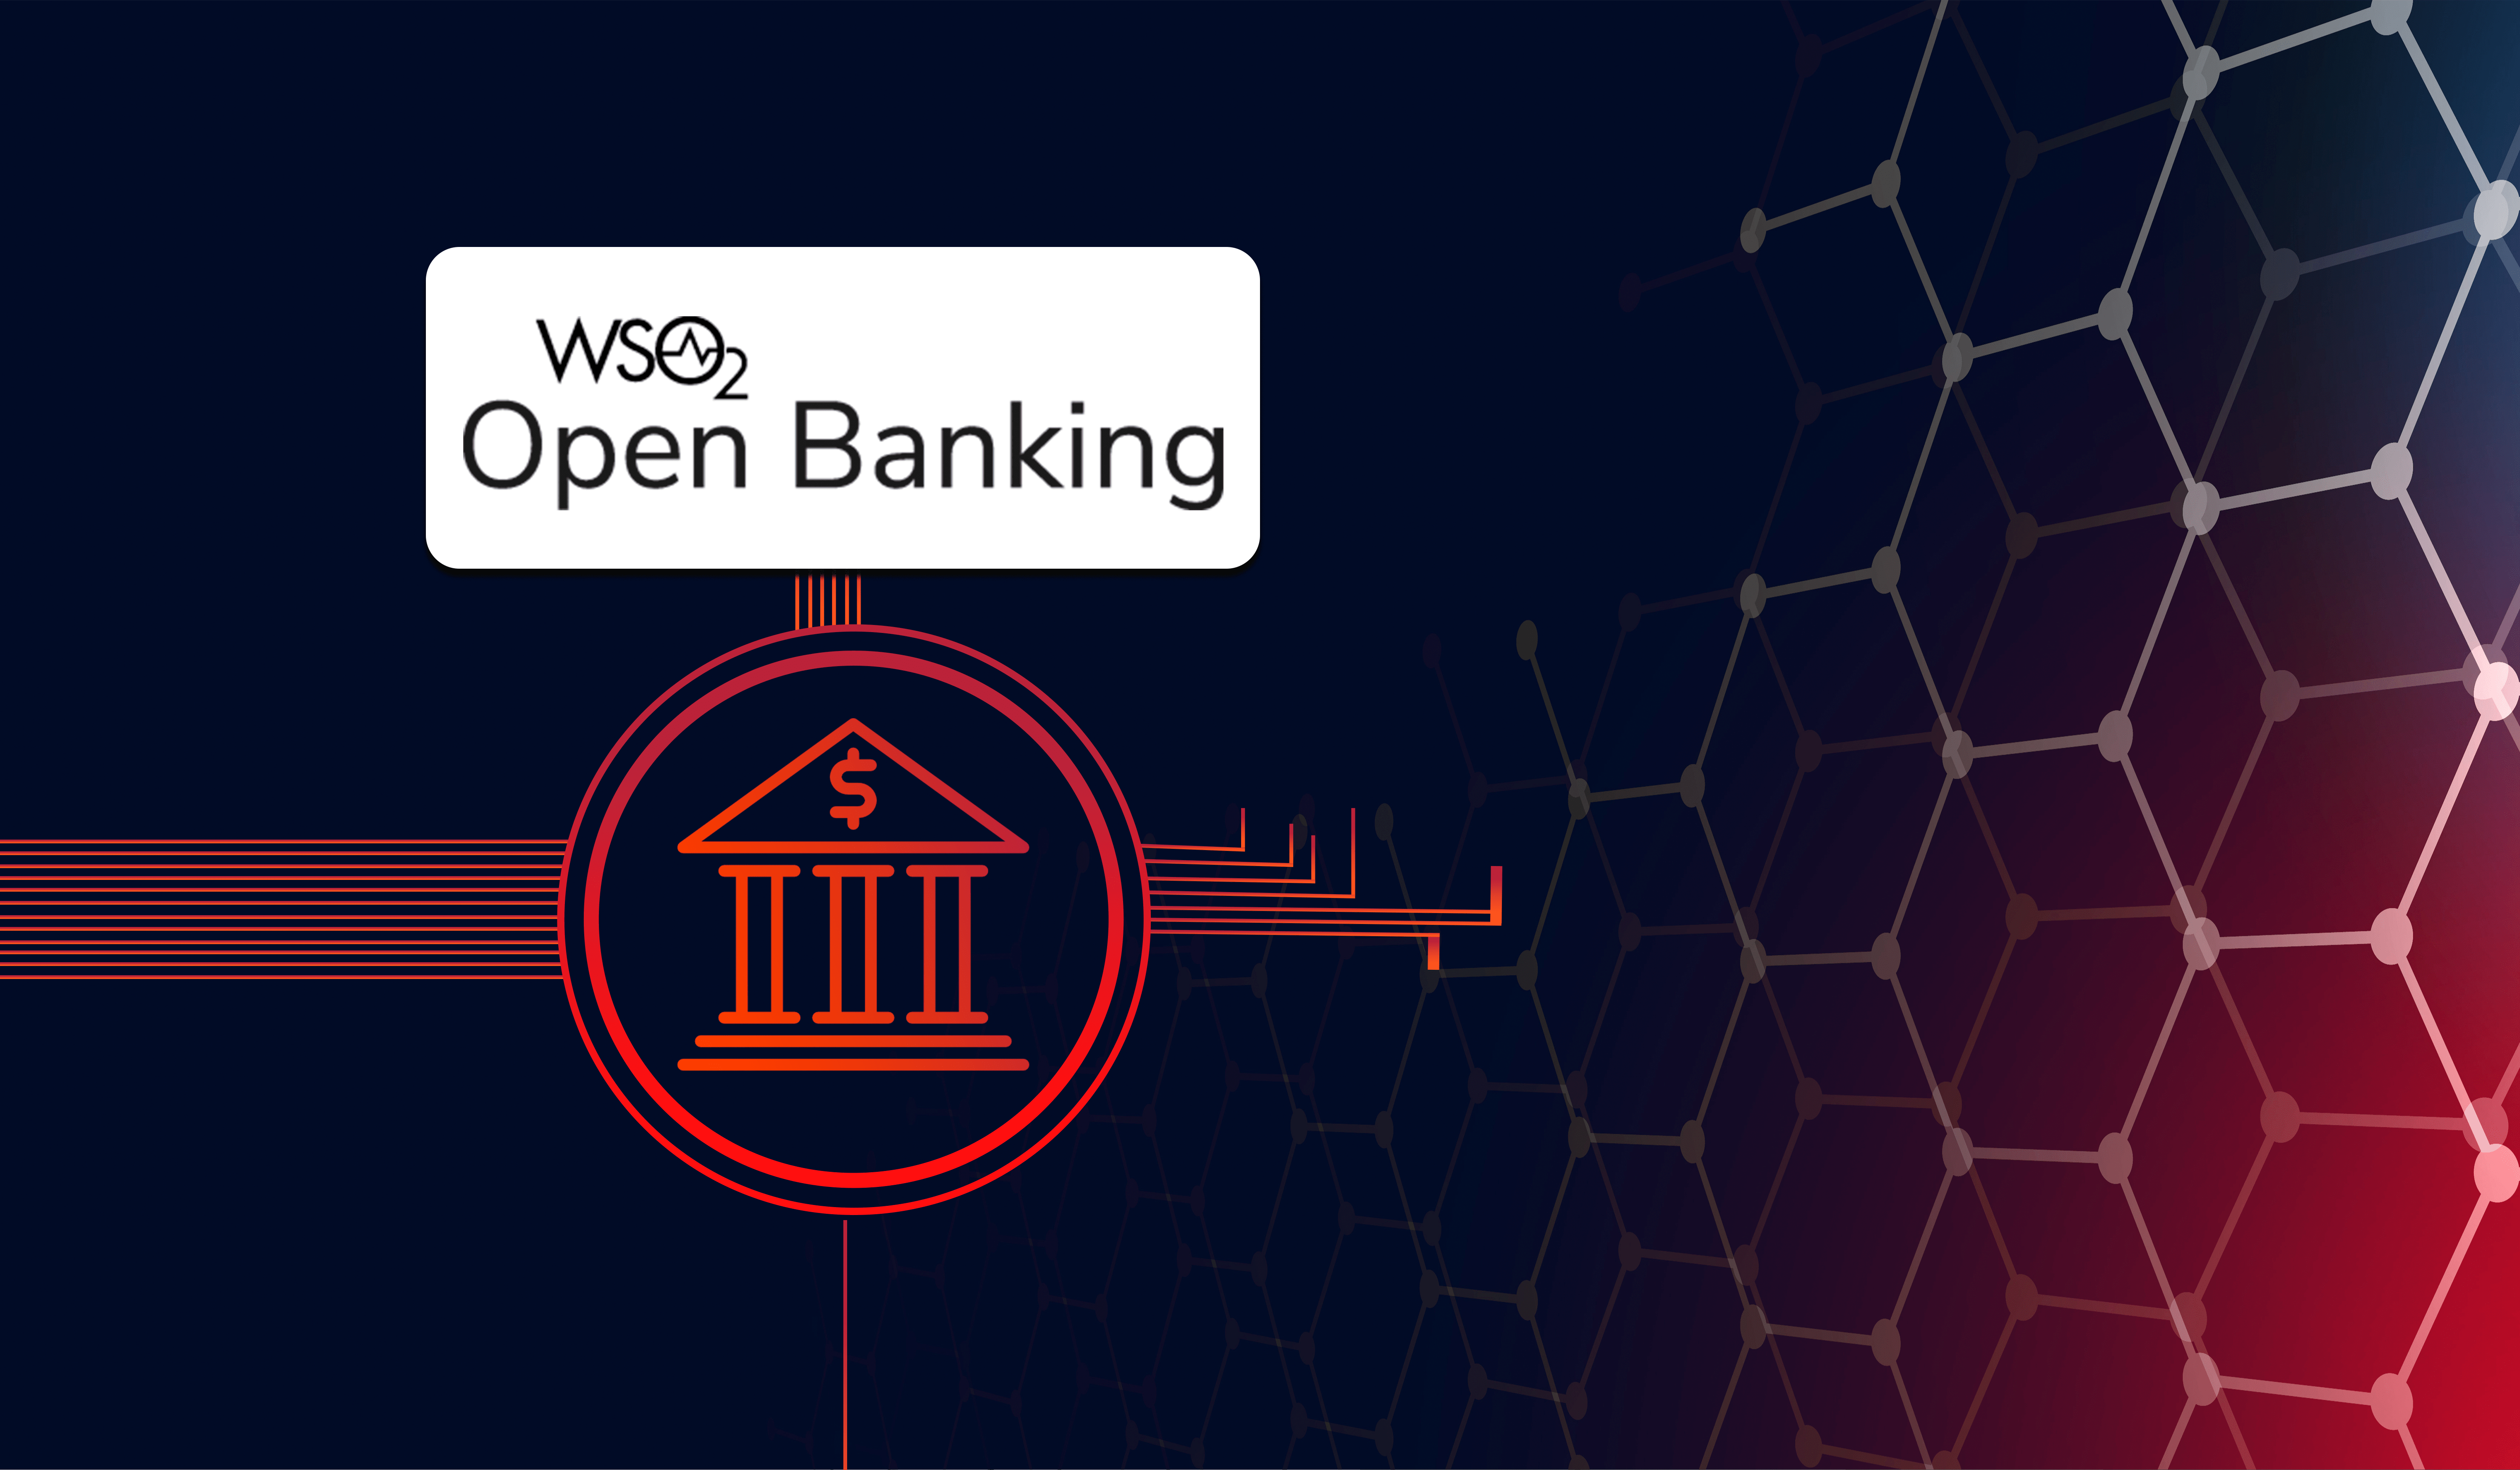 Open banking solution by WSO2, the concept and benefits